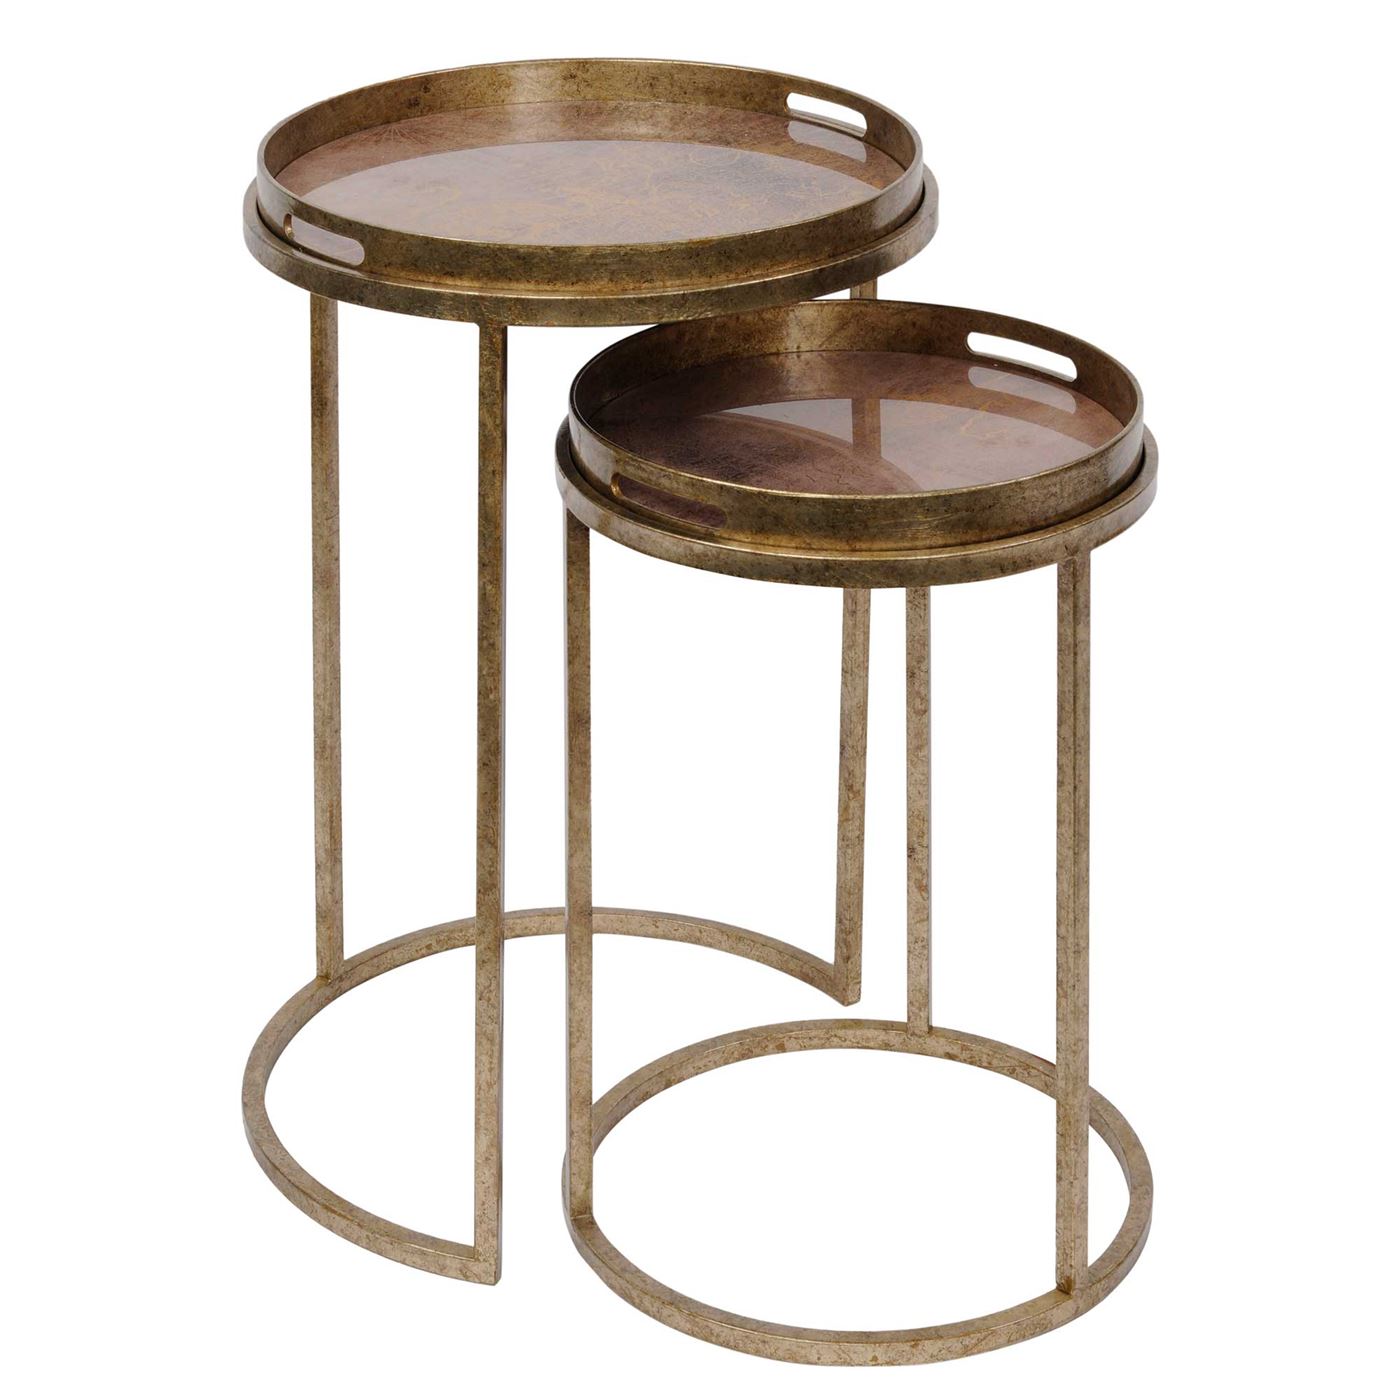 Set of 2 Antique Gold Atlas Side Tables, Round | Barker & Stonehouse